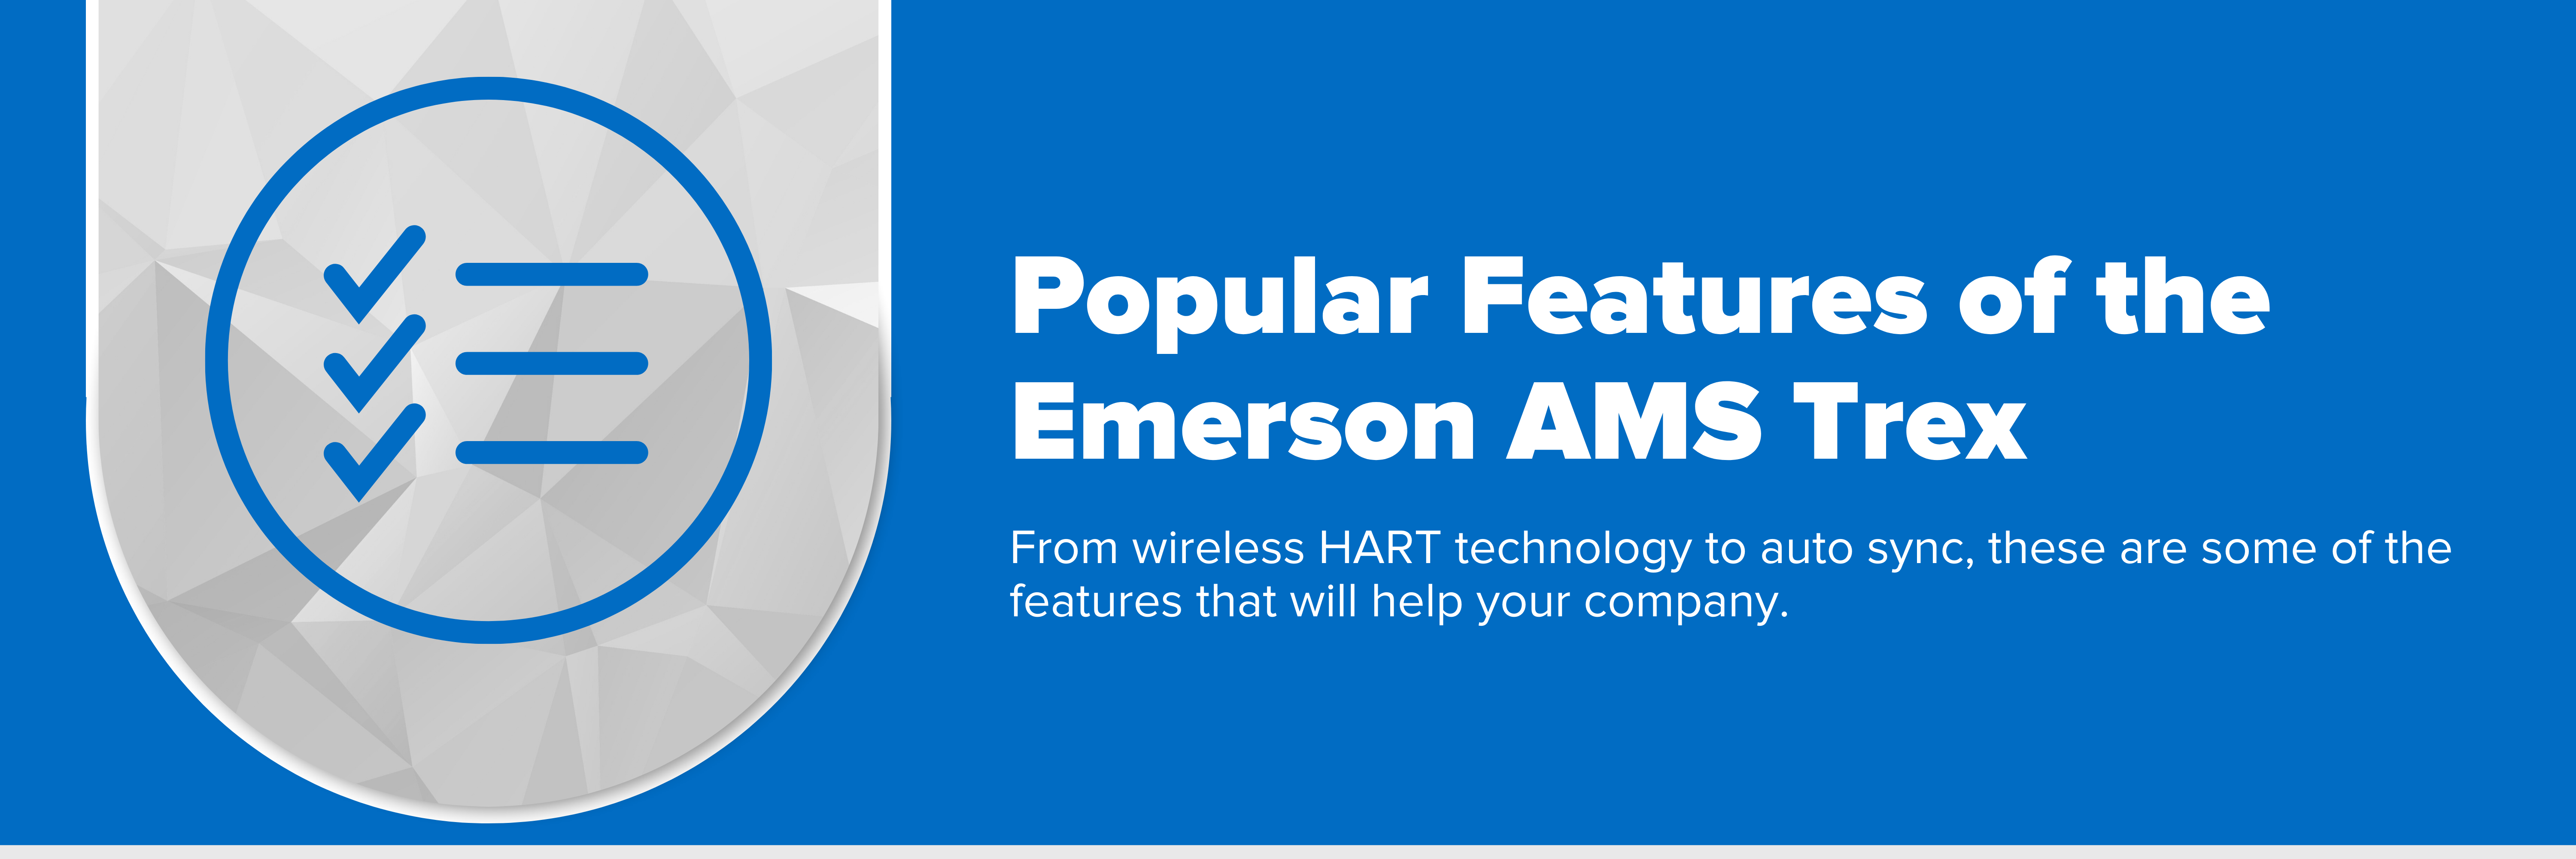 Header image with text "Popular Features of the Emerson AMS Trex"